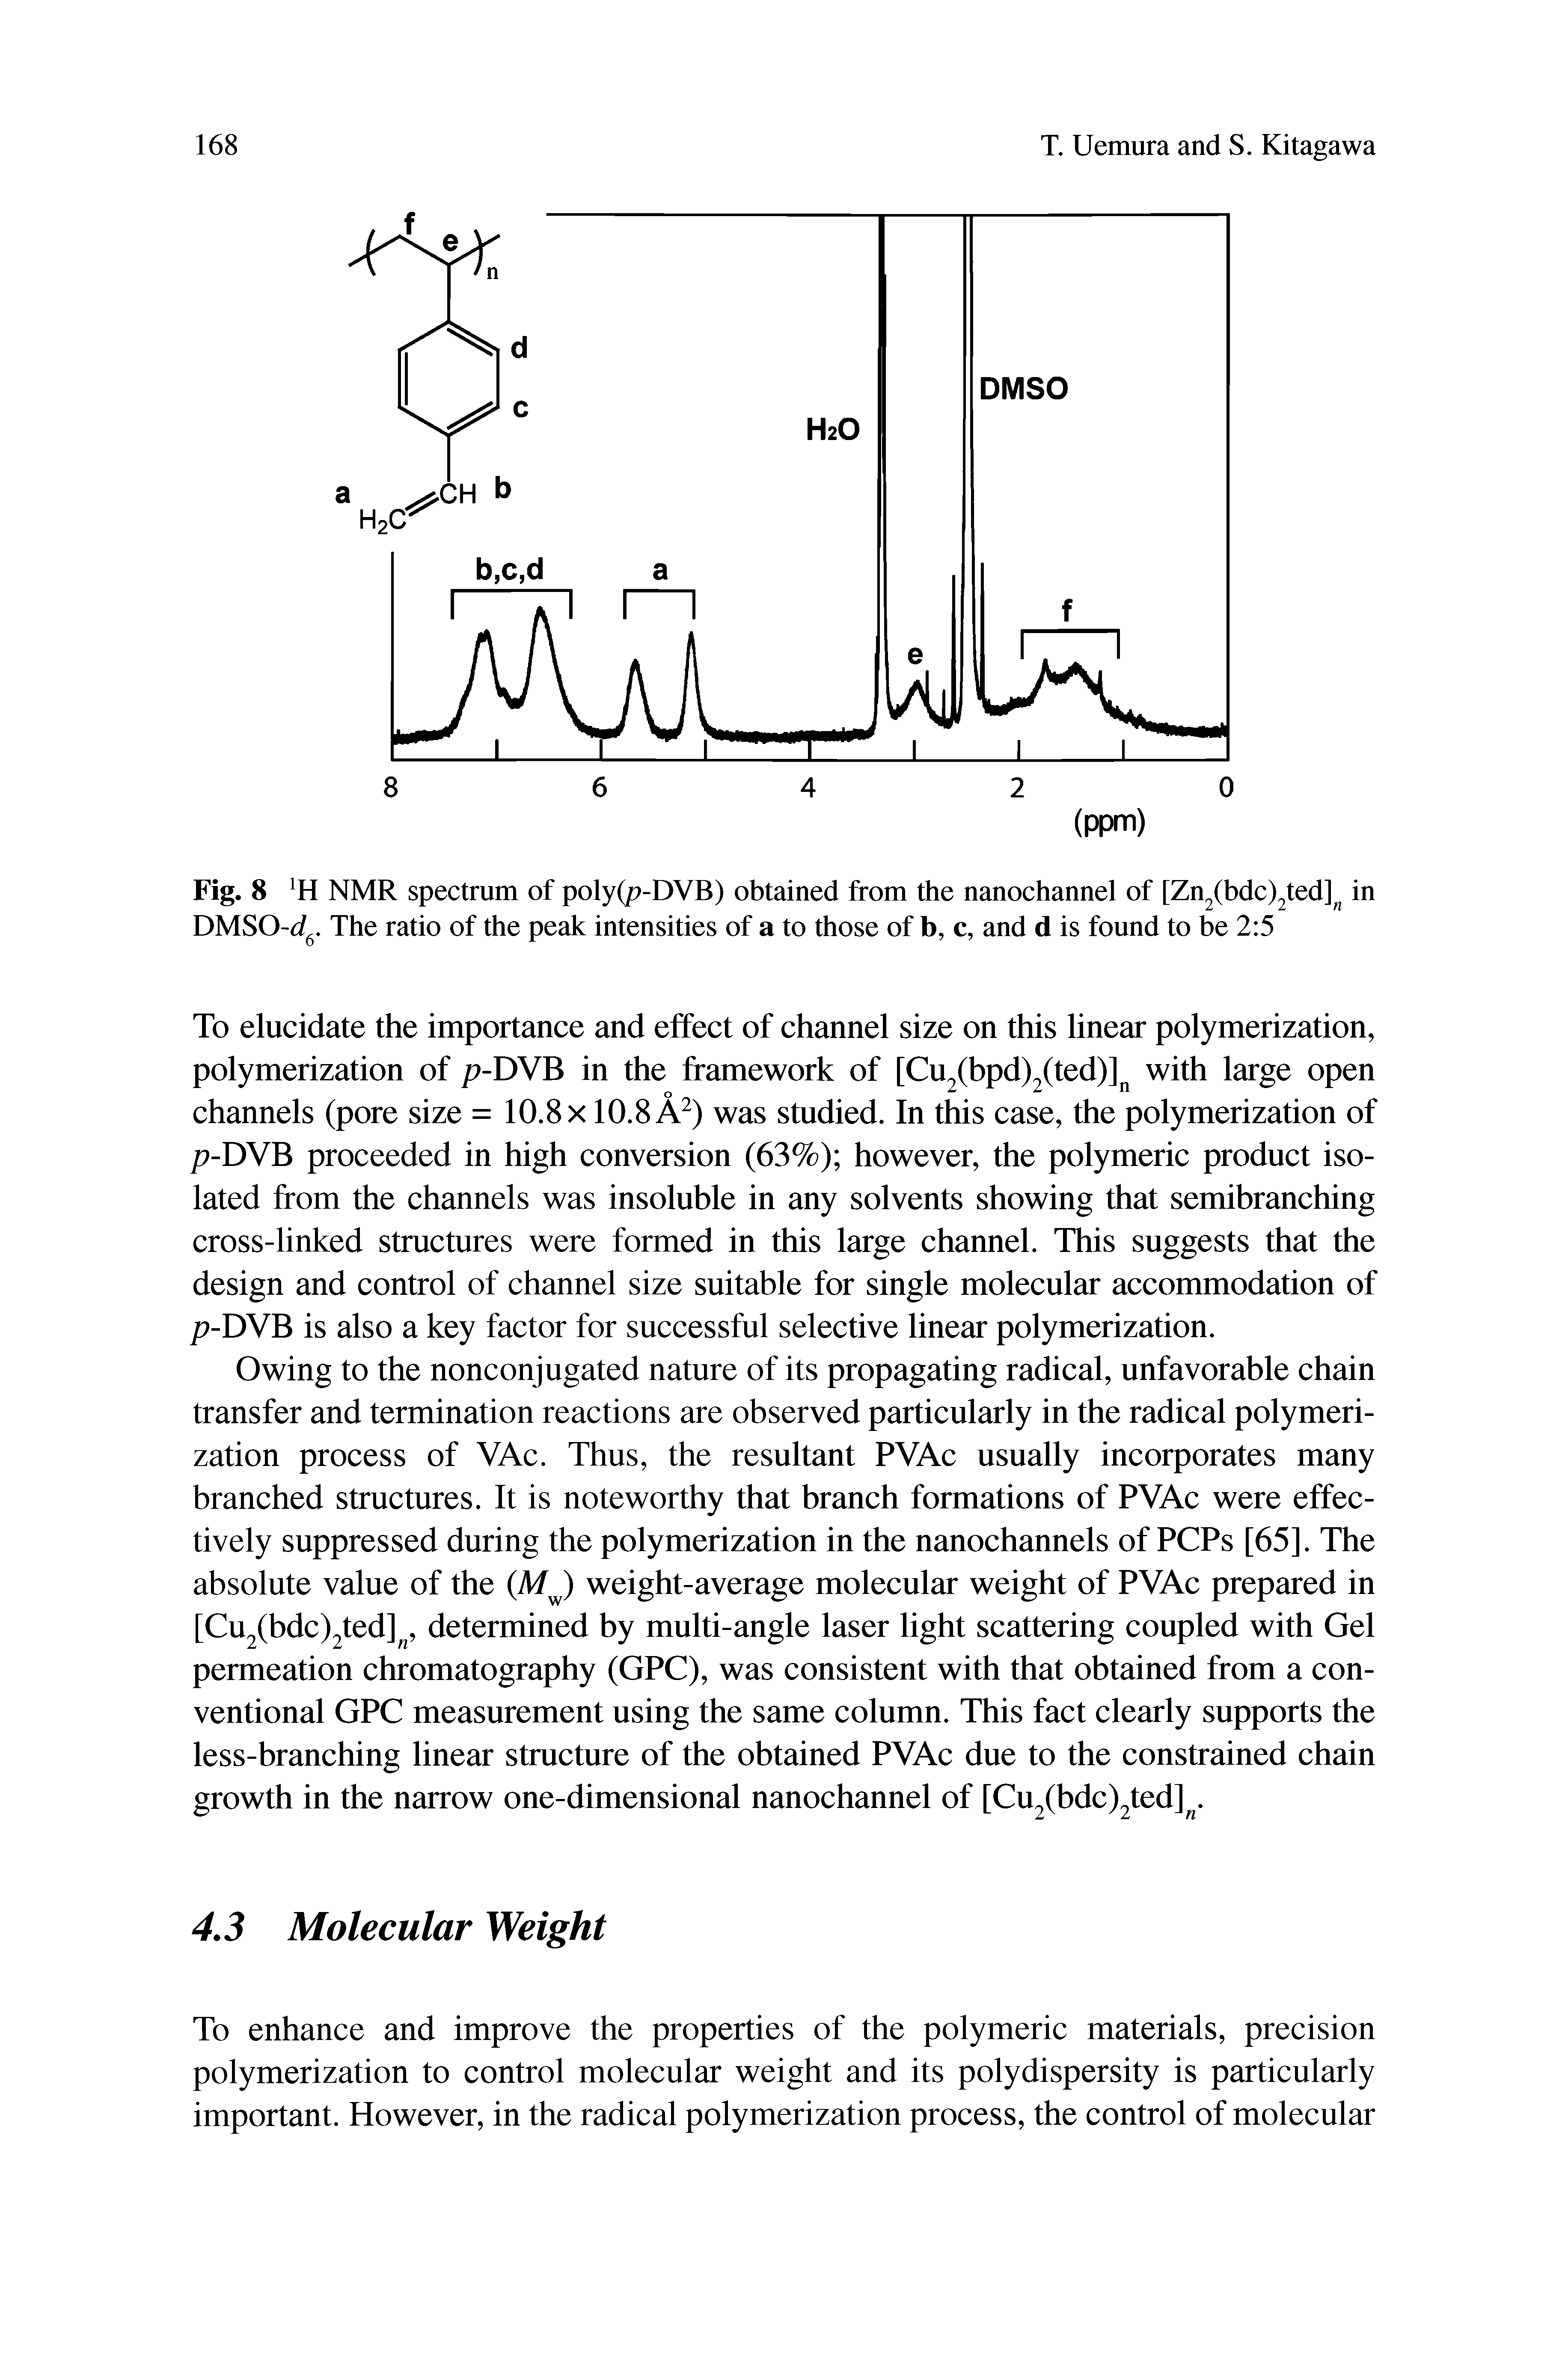 Fig. 8 NMR spectrum of poly(/ -DVB) obtained from the nanochannel of [Zn2(bdc)2ted] in DMSO- /. The ratio of the peak intensities of a to those of b, c, and d is found to be 2 5...